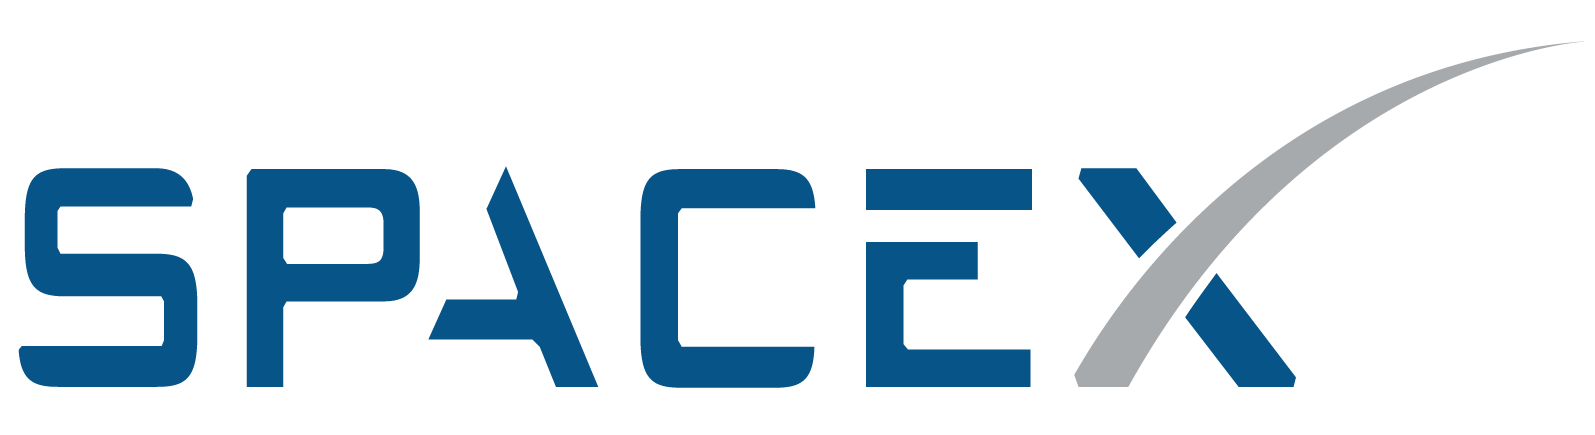 spacex logo